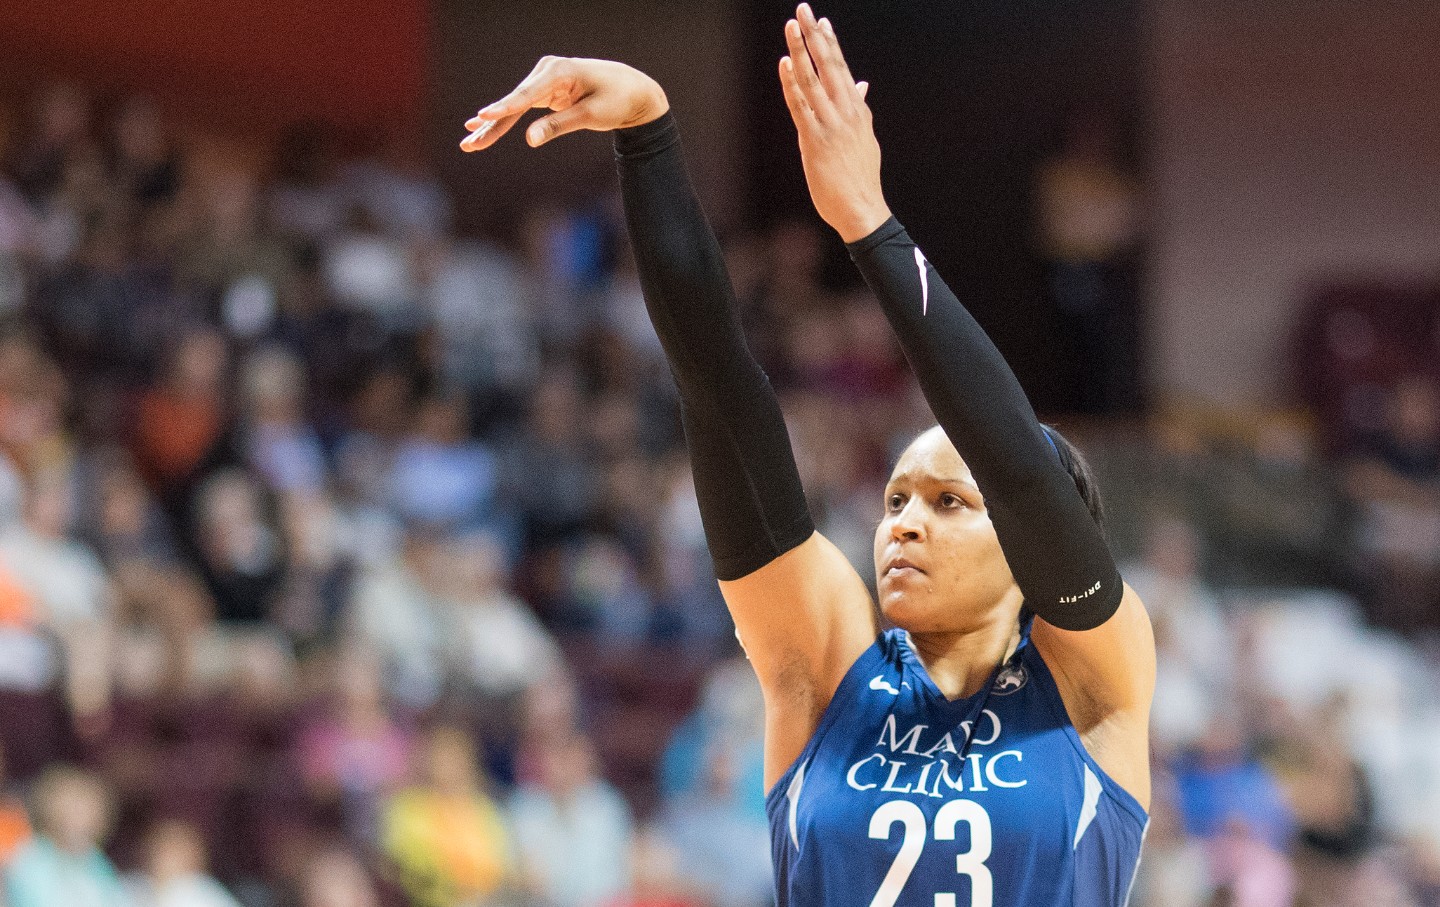 Maya Moore for the Win